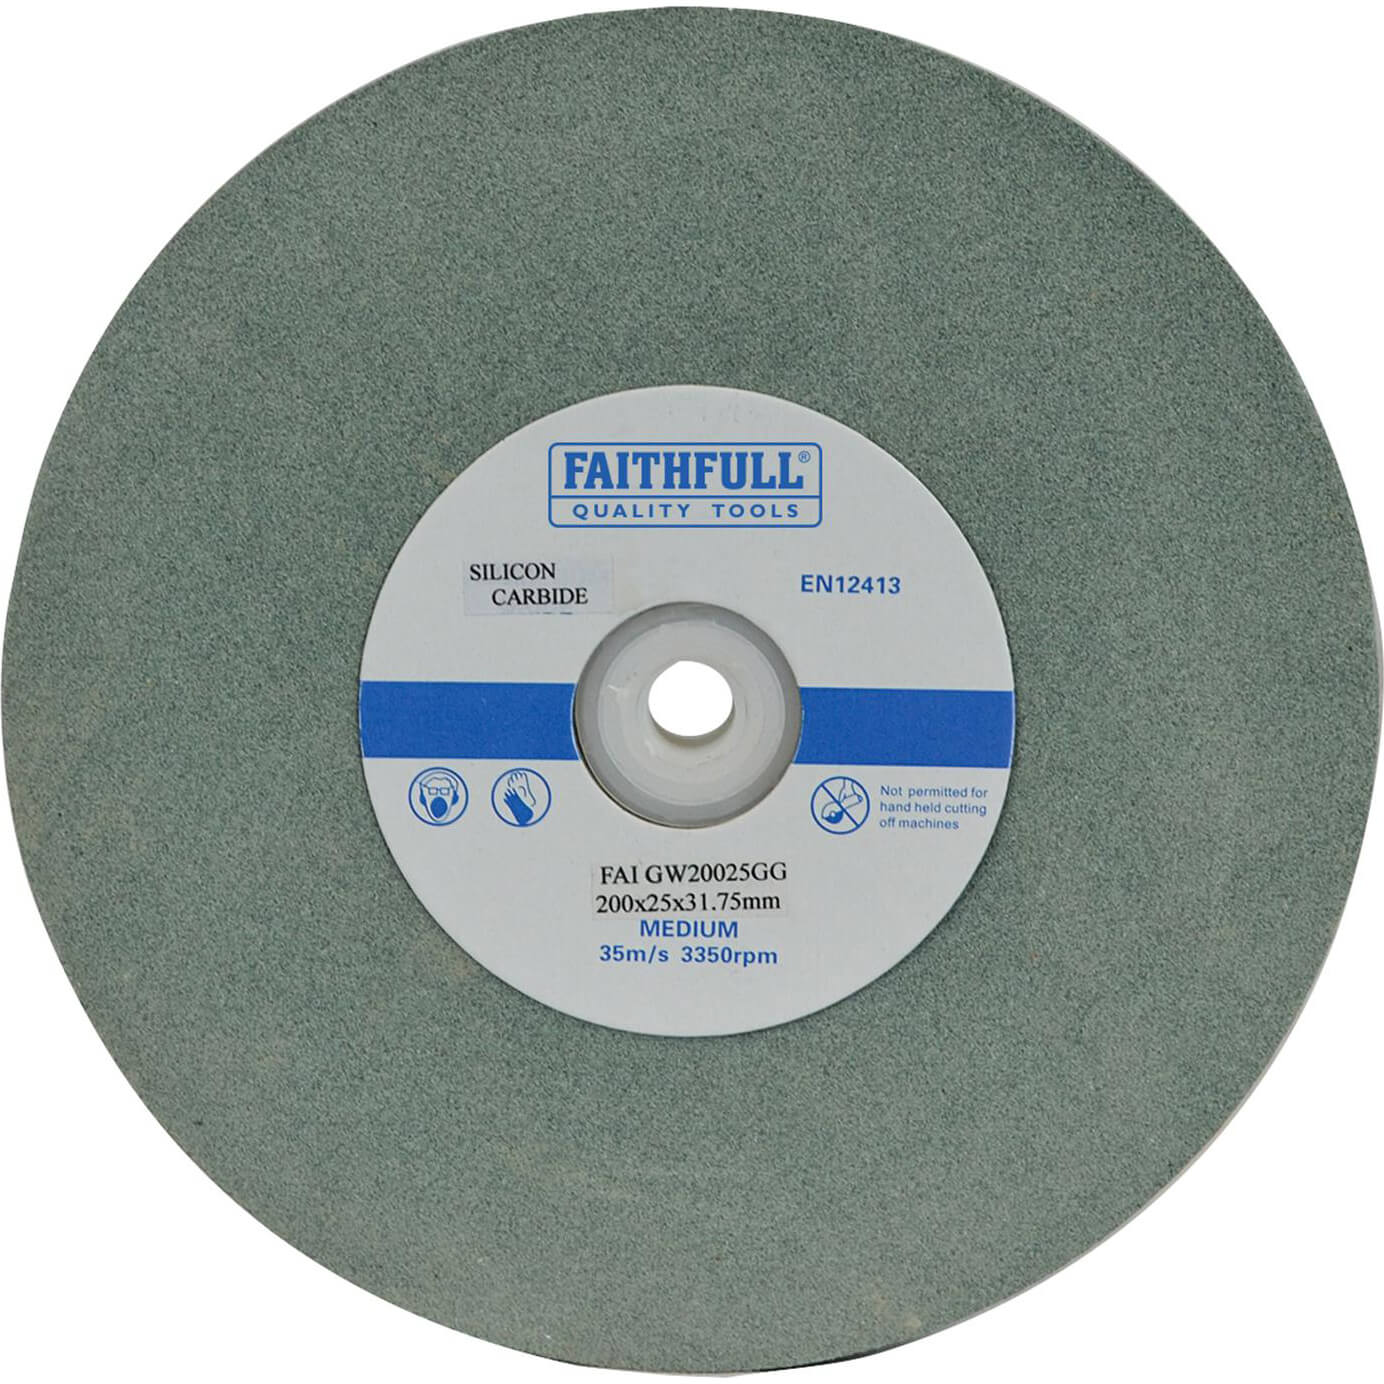 Photo of Faithfull Green Silicone Carbide Grinding Wheel 200mm 25mm Fine